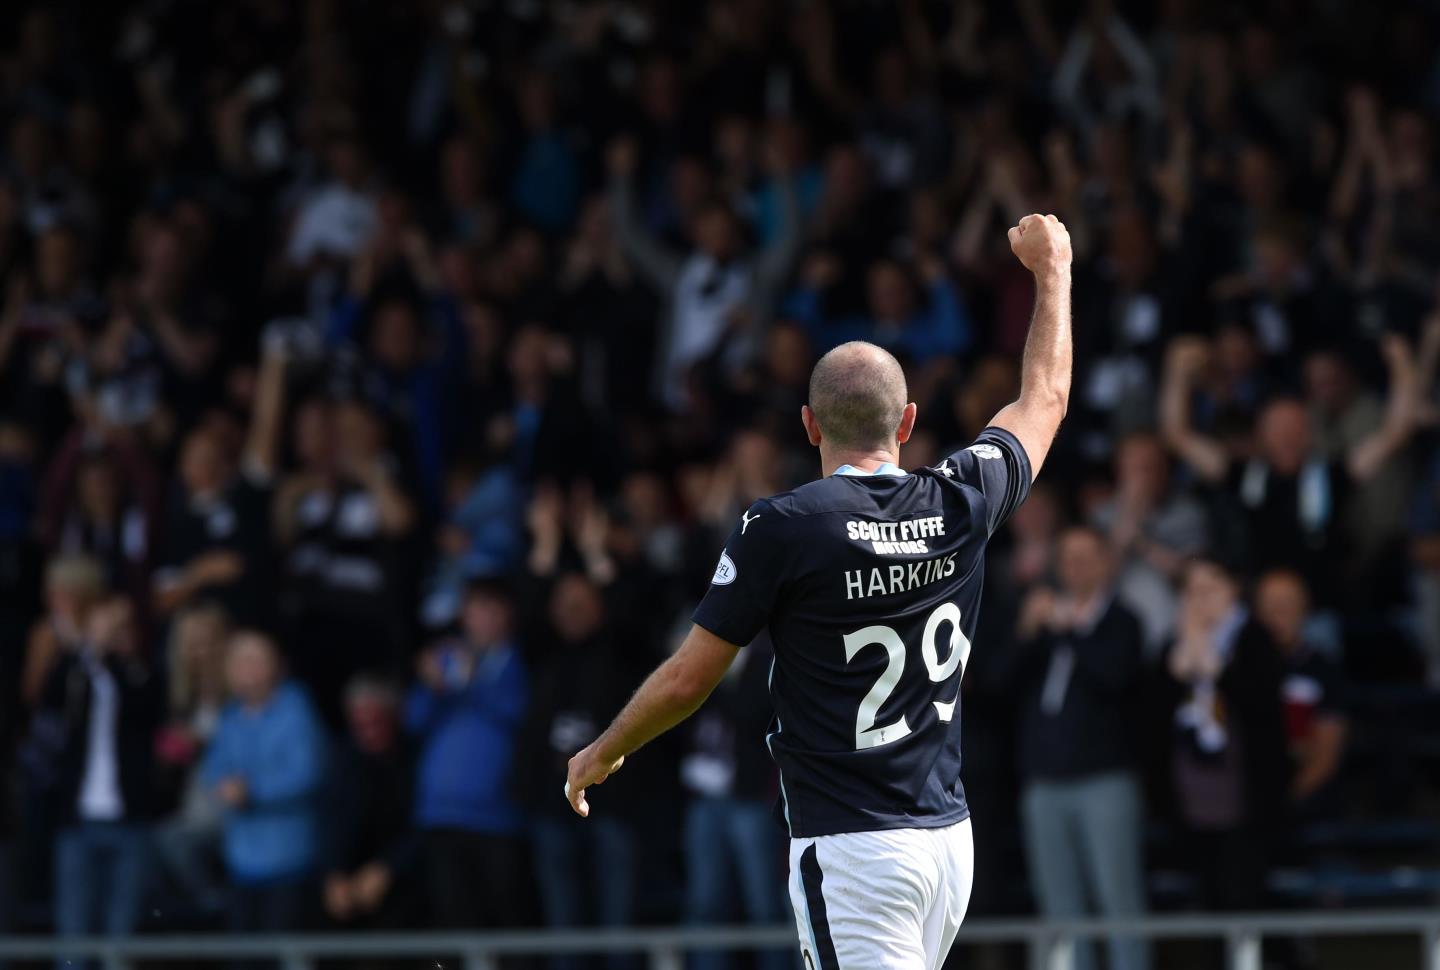 Dundee 'Deefiant' hero Gary Harkins aims to foster Forfar fighting spirit  for League Two promotion push